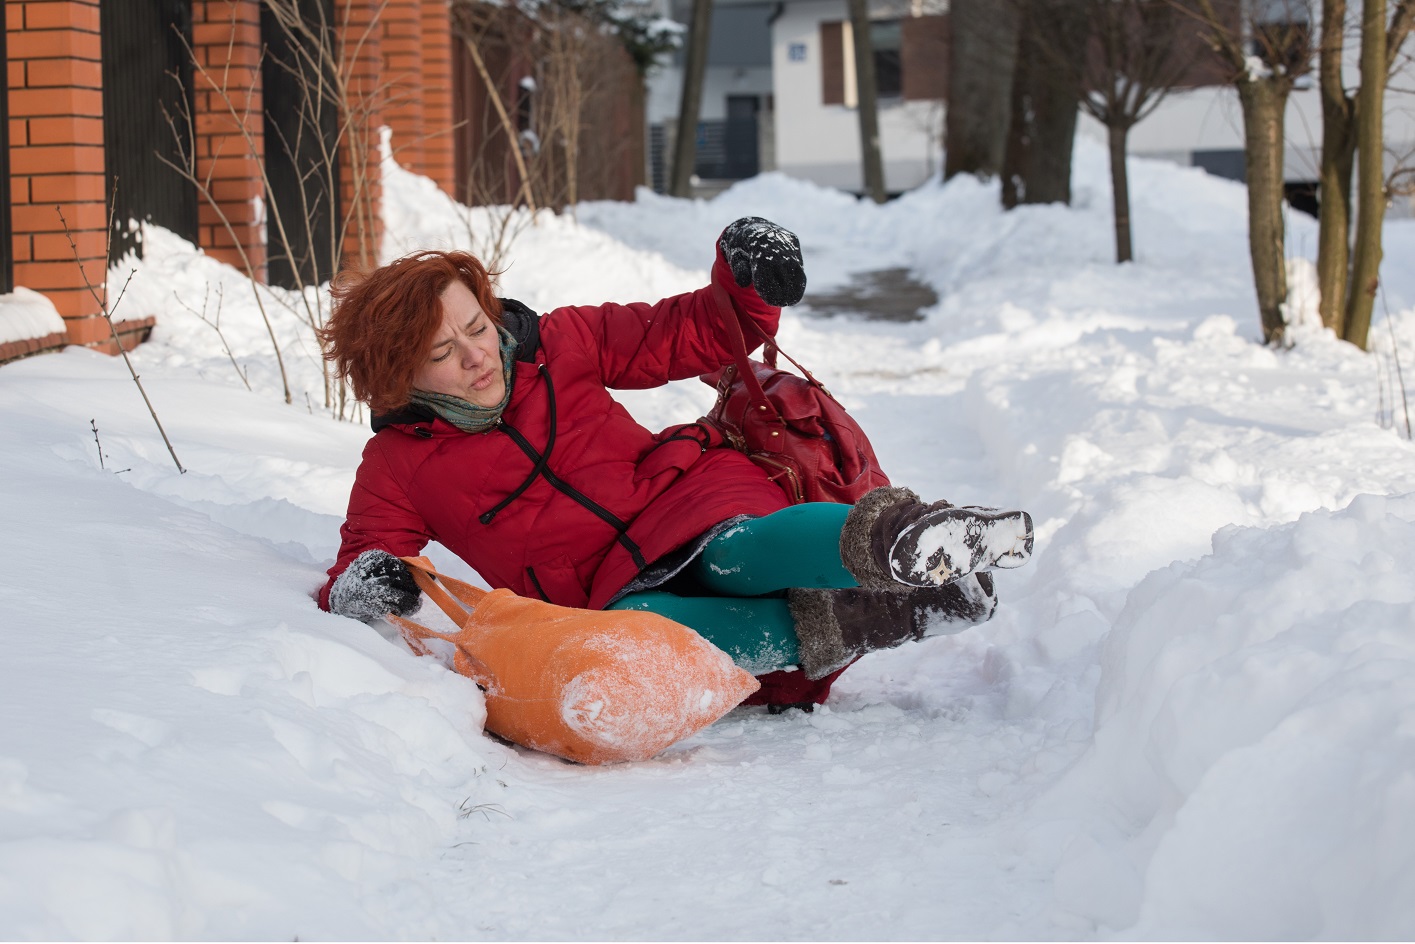 Slips, Trips and Falls, A Major Safety Hazard During Winter